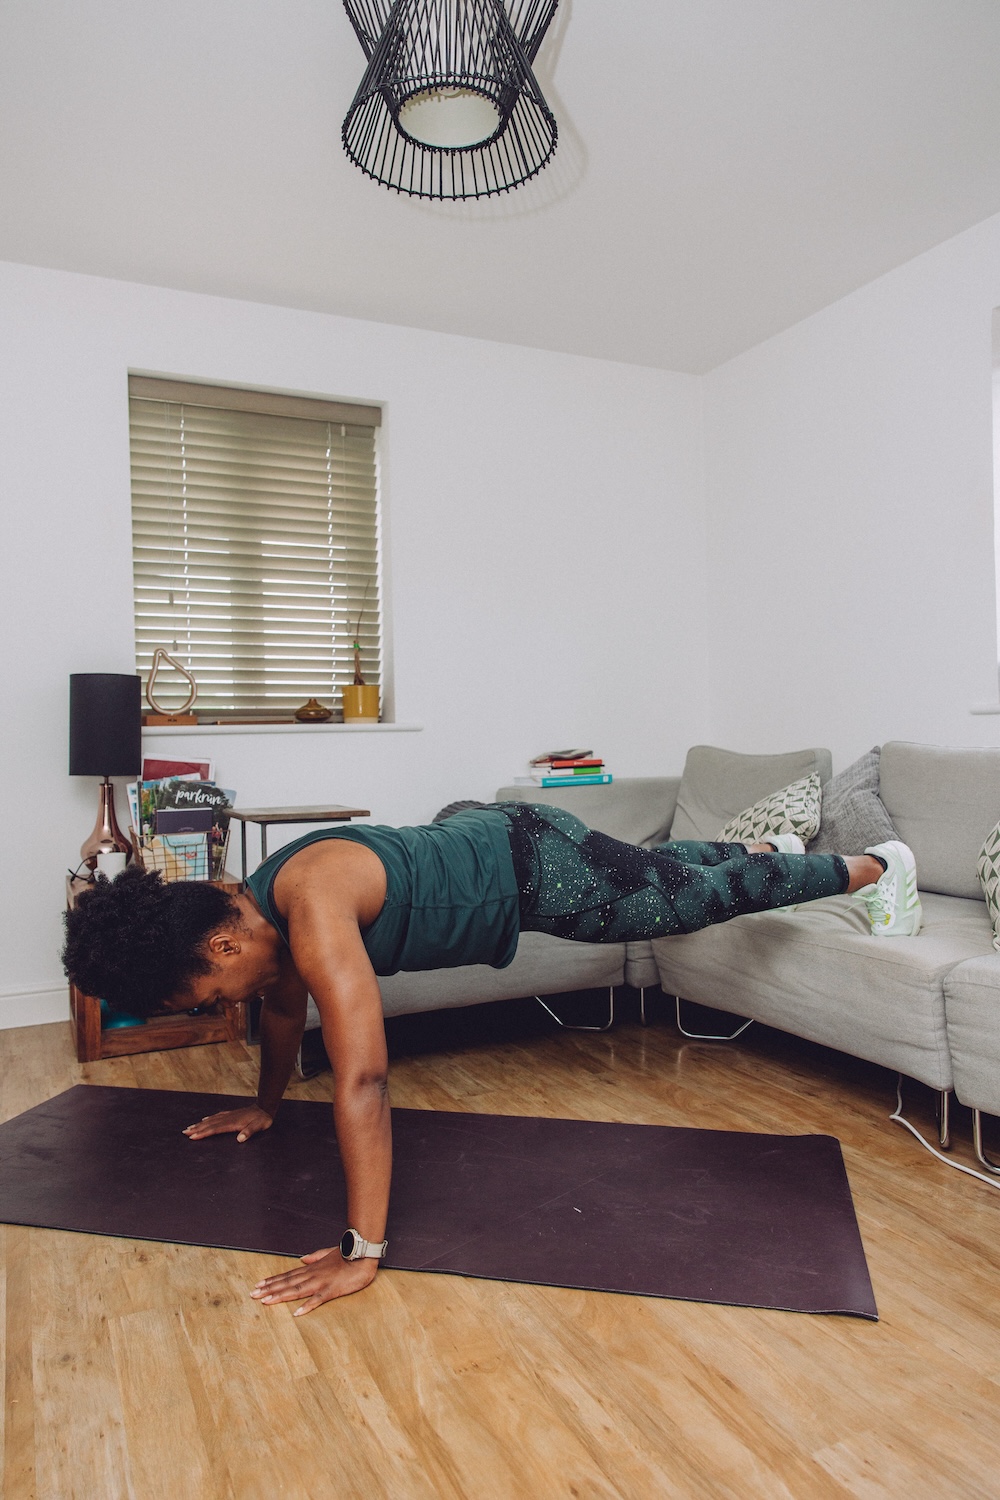 Perfect Form: How To Do Decline Push Ups (& Benefits) - keep it simpElle